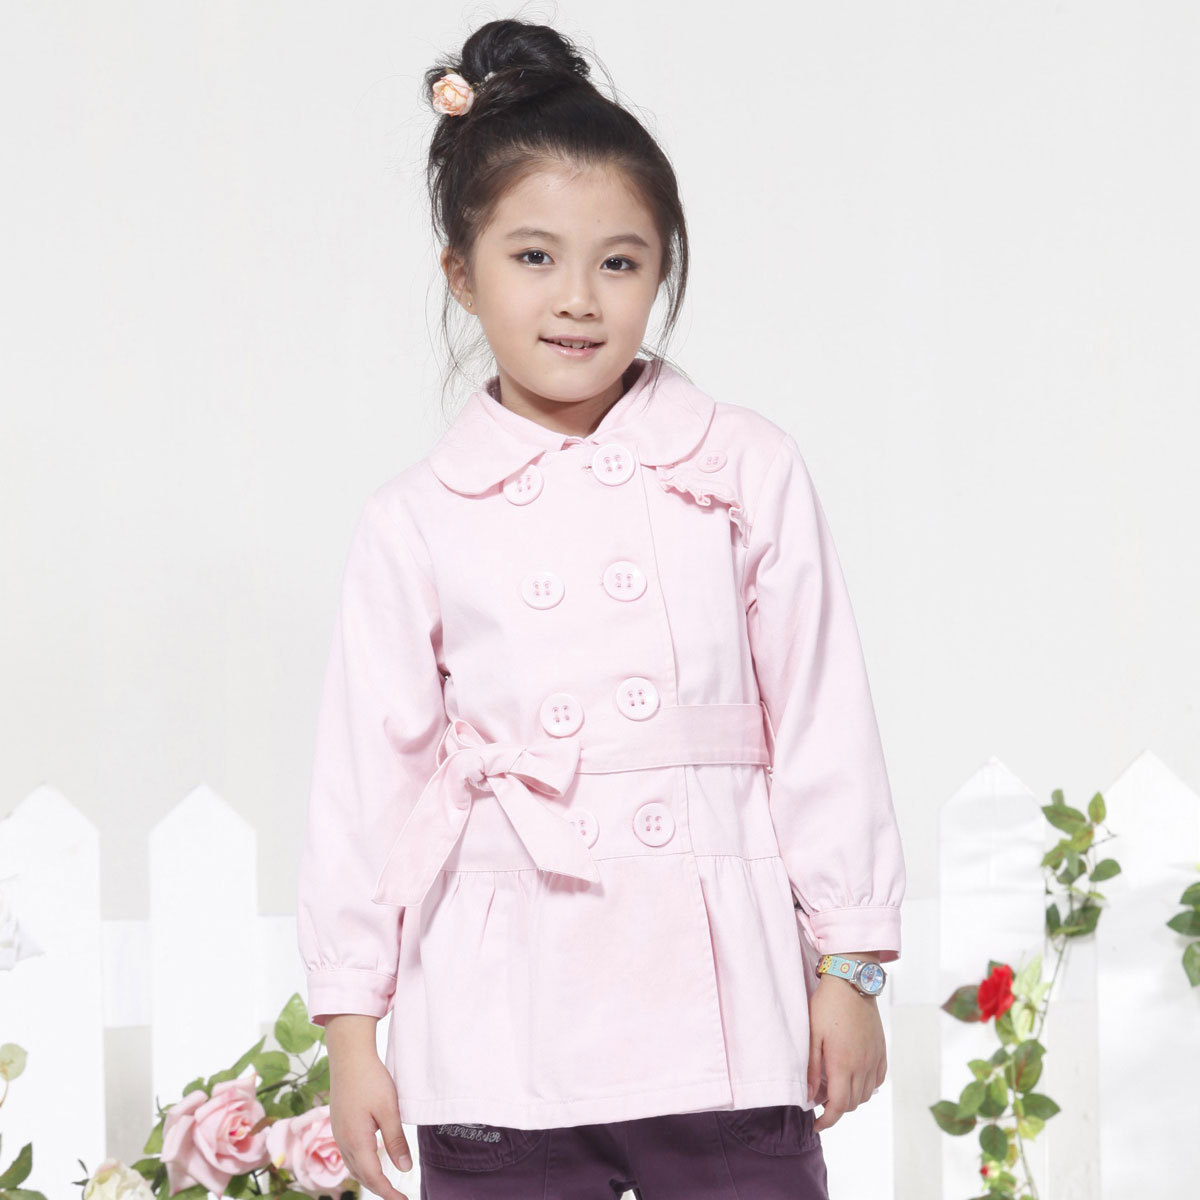 Children's clothing 2012 autumn and winter large female child lengthen trench outerwear j93006 free shipping